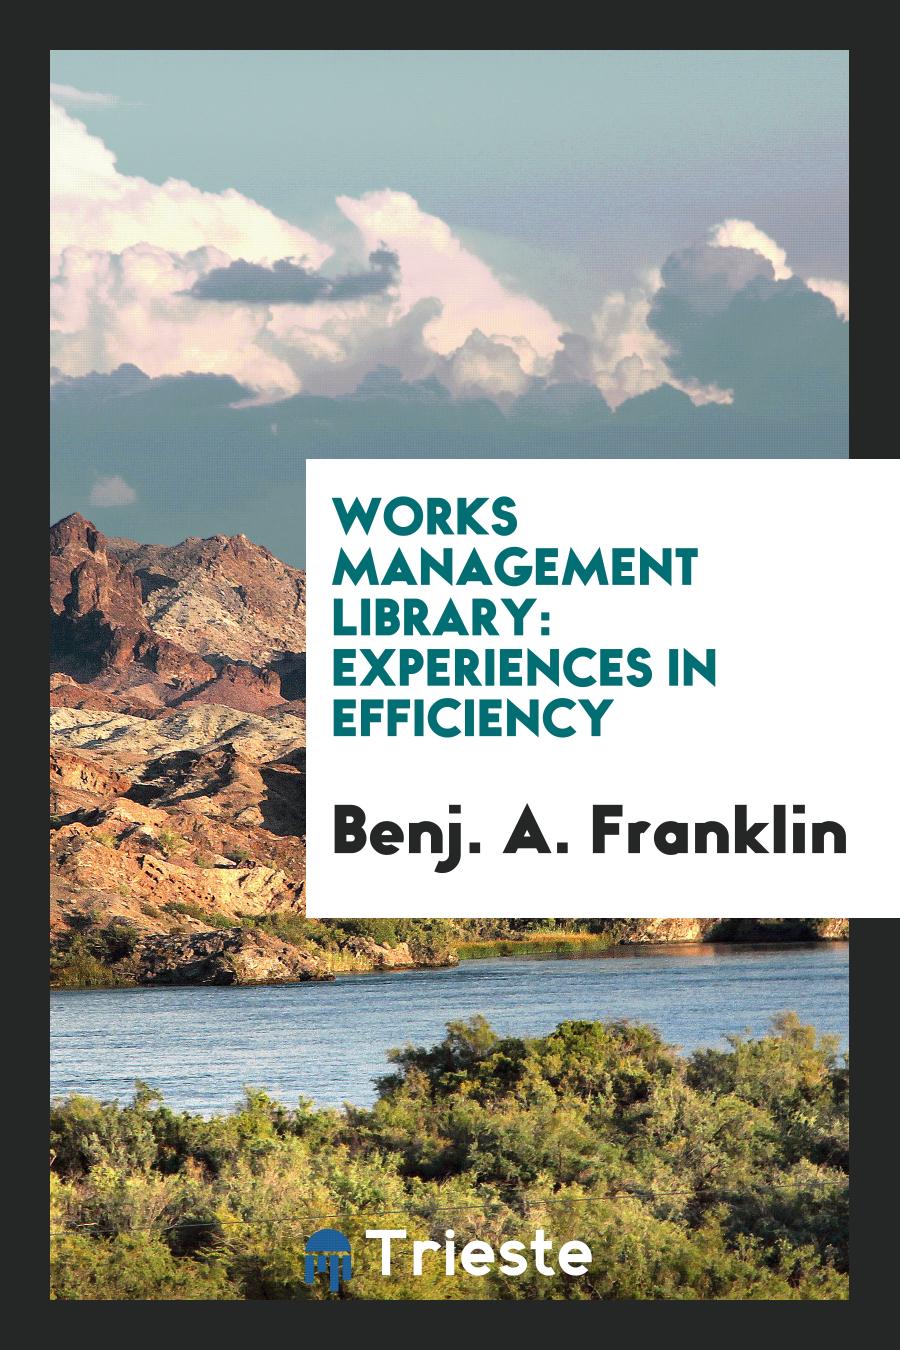 Works Management Library: Experiences in Efficiency